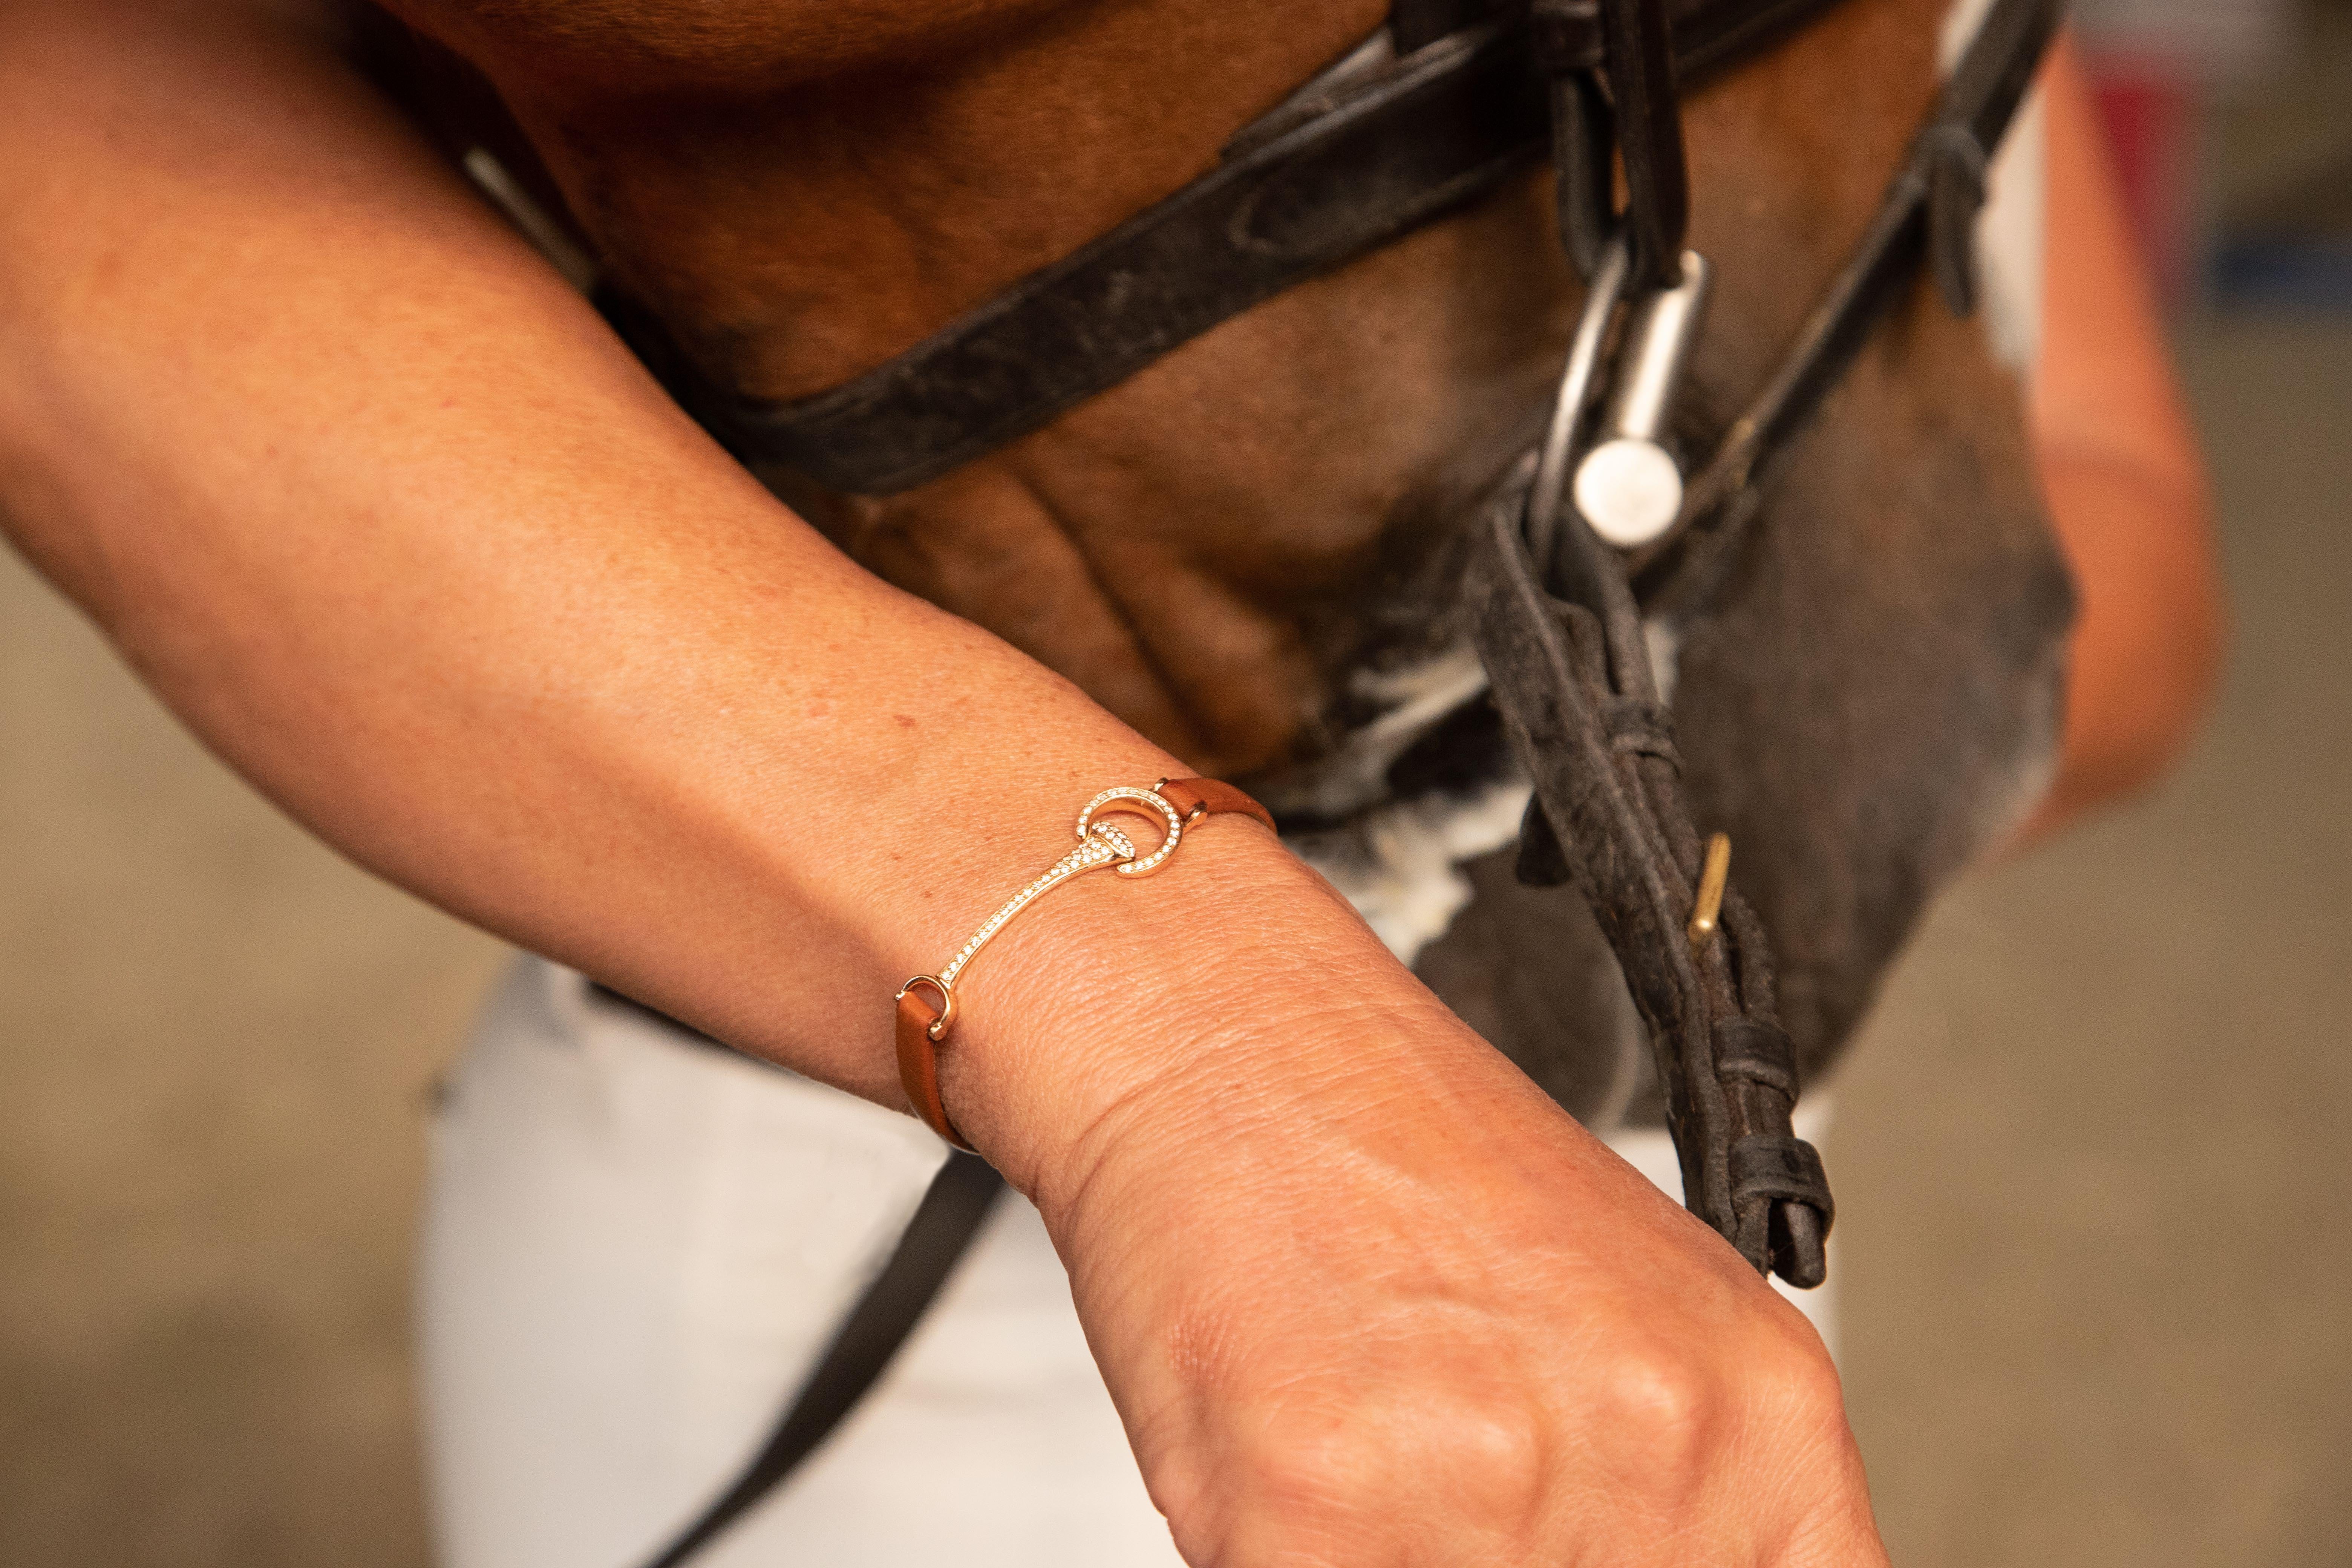 Handcrafted “Horse bit” bracelet in rose gold 18k, with custom brown calfskin leather strap.
18kt rose  gold buckle.

The HorseBit, symbol of elegance and belonging to the equestrian world.
The horseshoe and the horsebit, equestrian symbols, brings